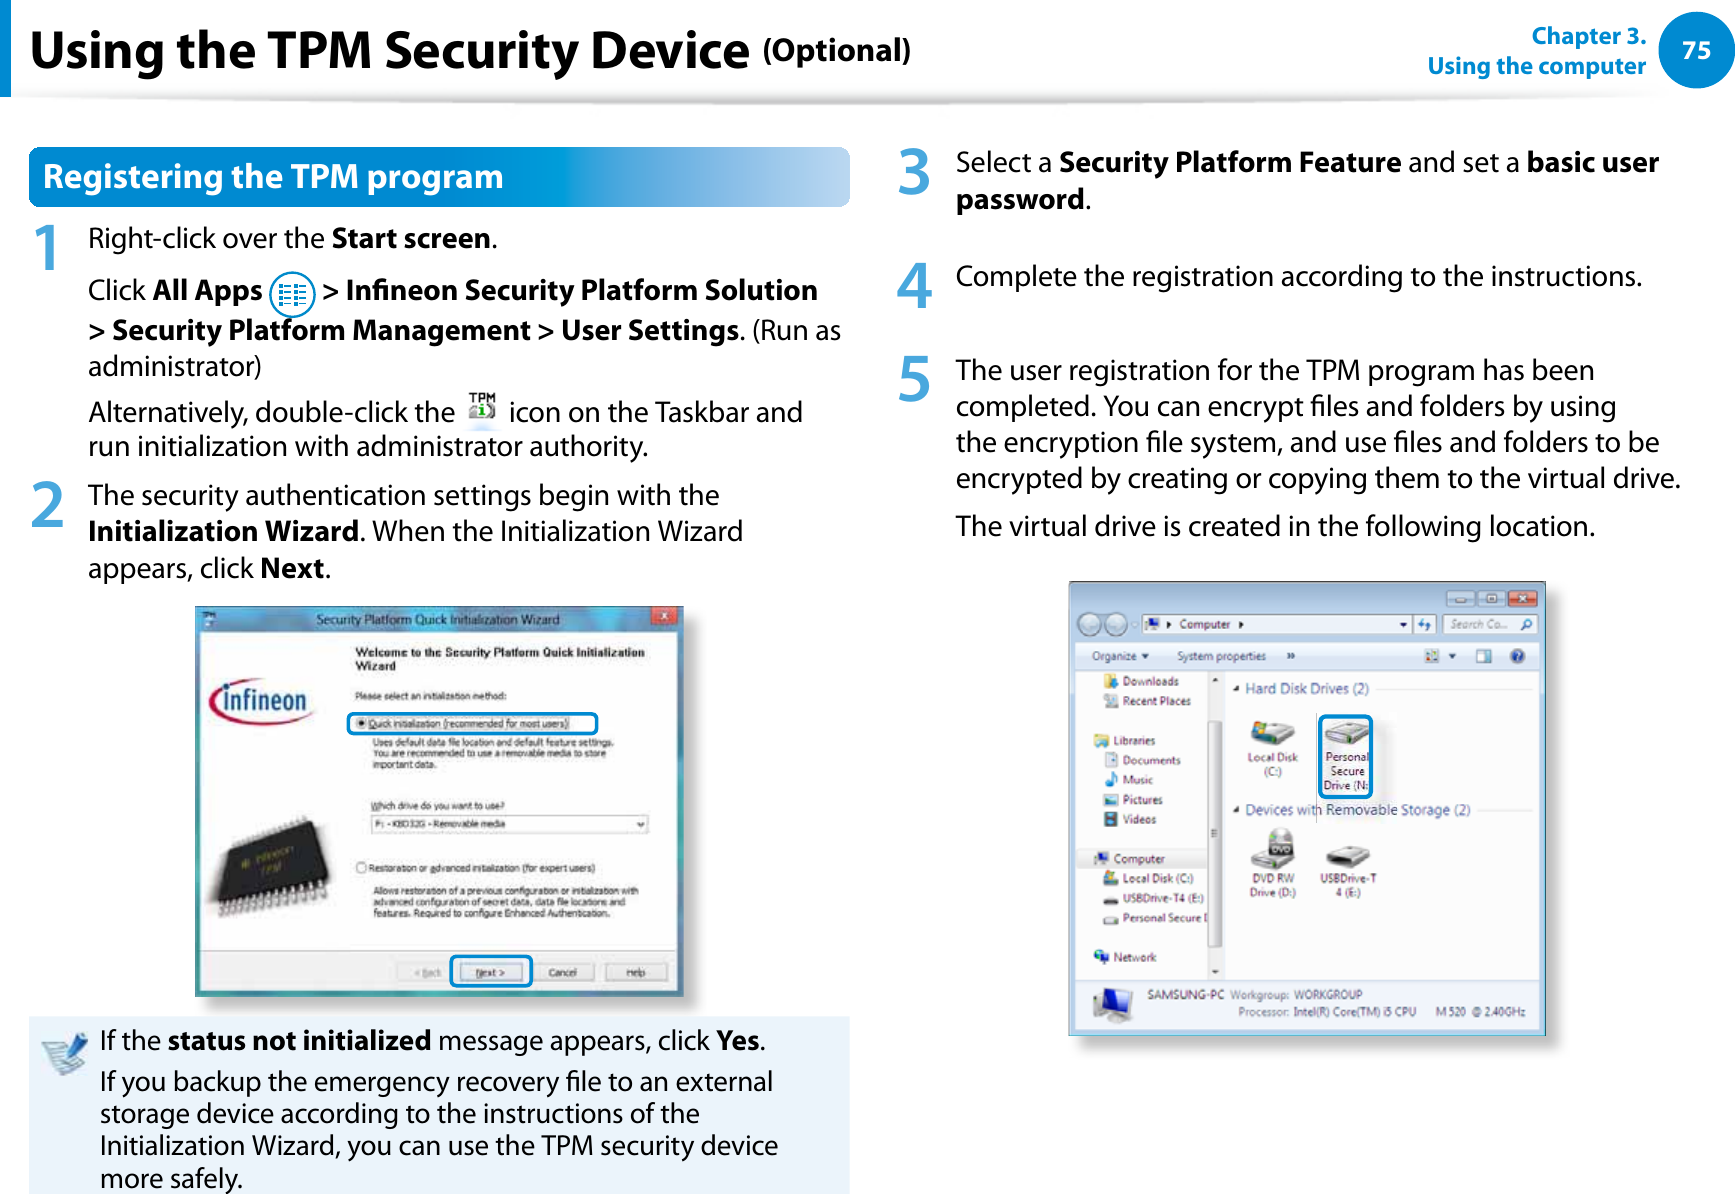 75Chapter 3.  Using the computerUsing the TPM Security Device (Optional)Registering the TPM program1  Right-click over the Start screen.Click All Apps   &gt; Inneon Security Platform Solution &gt; Security Platform Management &gt; User Settings. (Run as administrator)Alternatively, double-click the   icon on the Taskbar and run initialization with administrator authority.2  The security authentication settings begin with the Initialization Wizard. When the Initialization Wizard appears, click Next. If the status not initialized message appears, click Yes.If you backup the emergency recovery le to an external storage device according to the instructions of the Initialization Wizard, you can use the TPM security device more safely.3 Select a Security Platform Feature and set a basic user password.4  Complete the registration according to the instructions.5  The user registration for the TPM program has been completed. You can encrypt les and folders by using the encryption le system, and use les and folders to be encrypted by creating or copying them to the virtual drive. The virtual drive is created in the following location. 